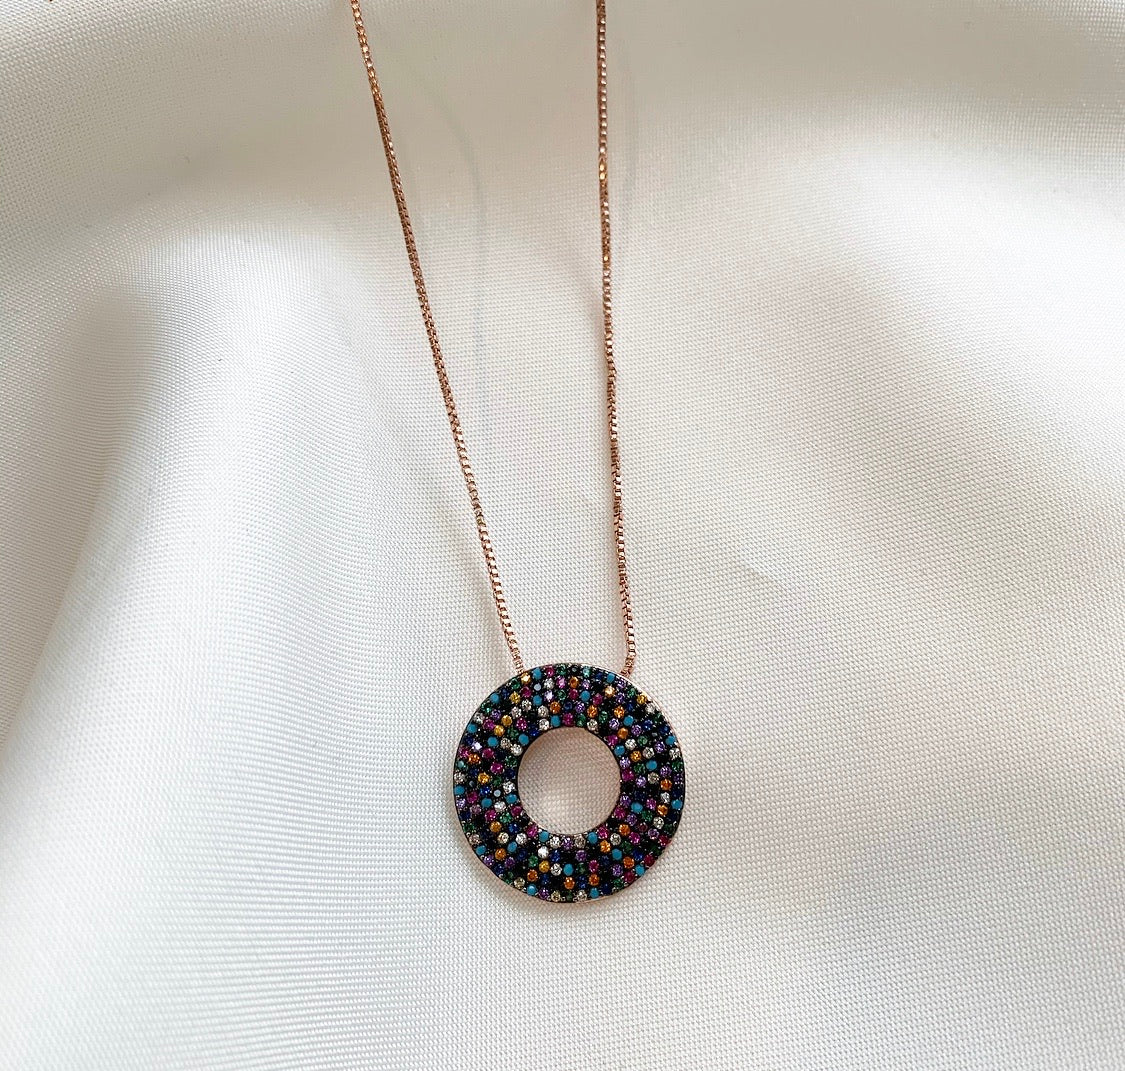 Colorful Stone Lia Necklace - Bohemian Style Pendant with Black Finish and 14k Rose Gold Plating, Cubic Zirconia Stone, 16-18" Length Bijou Her